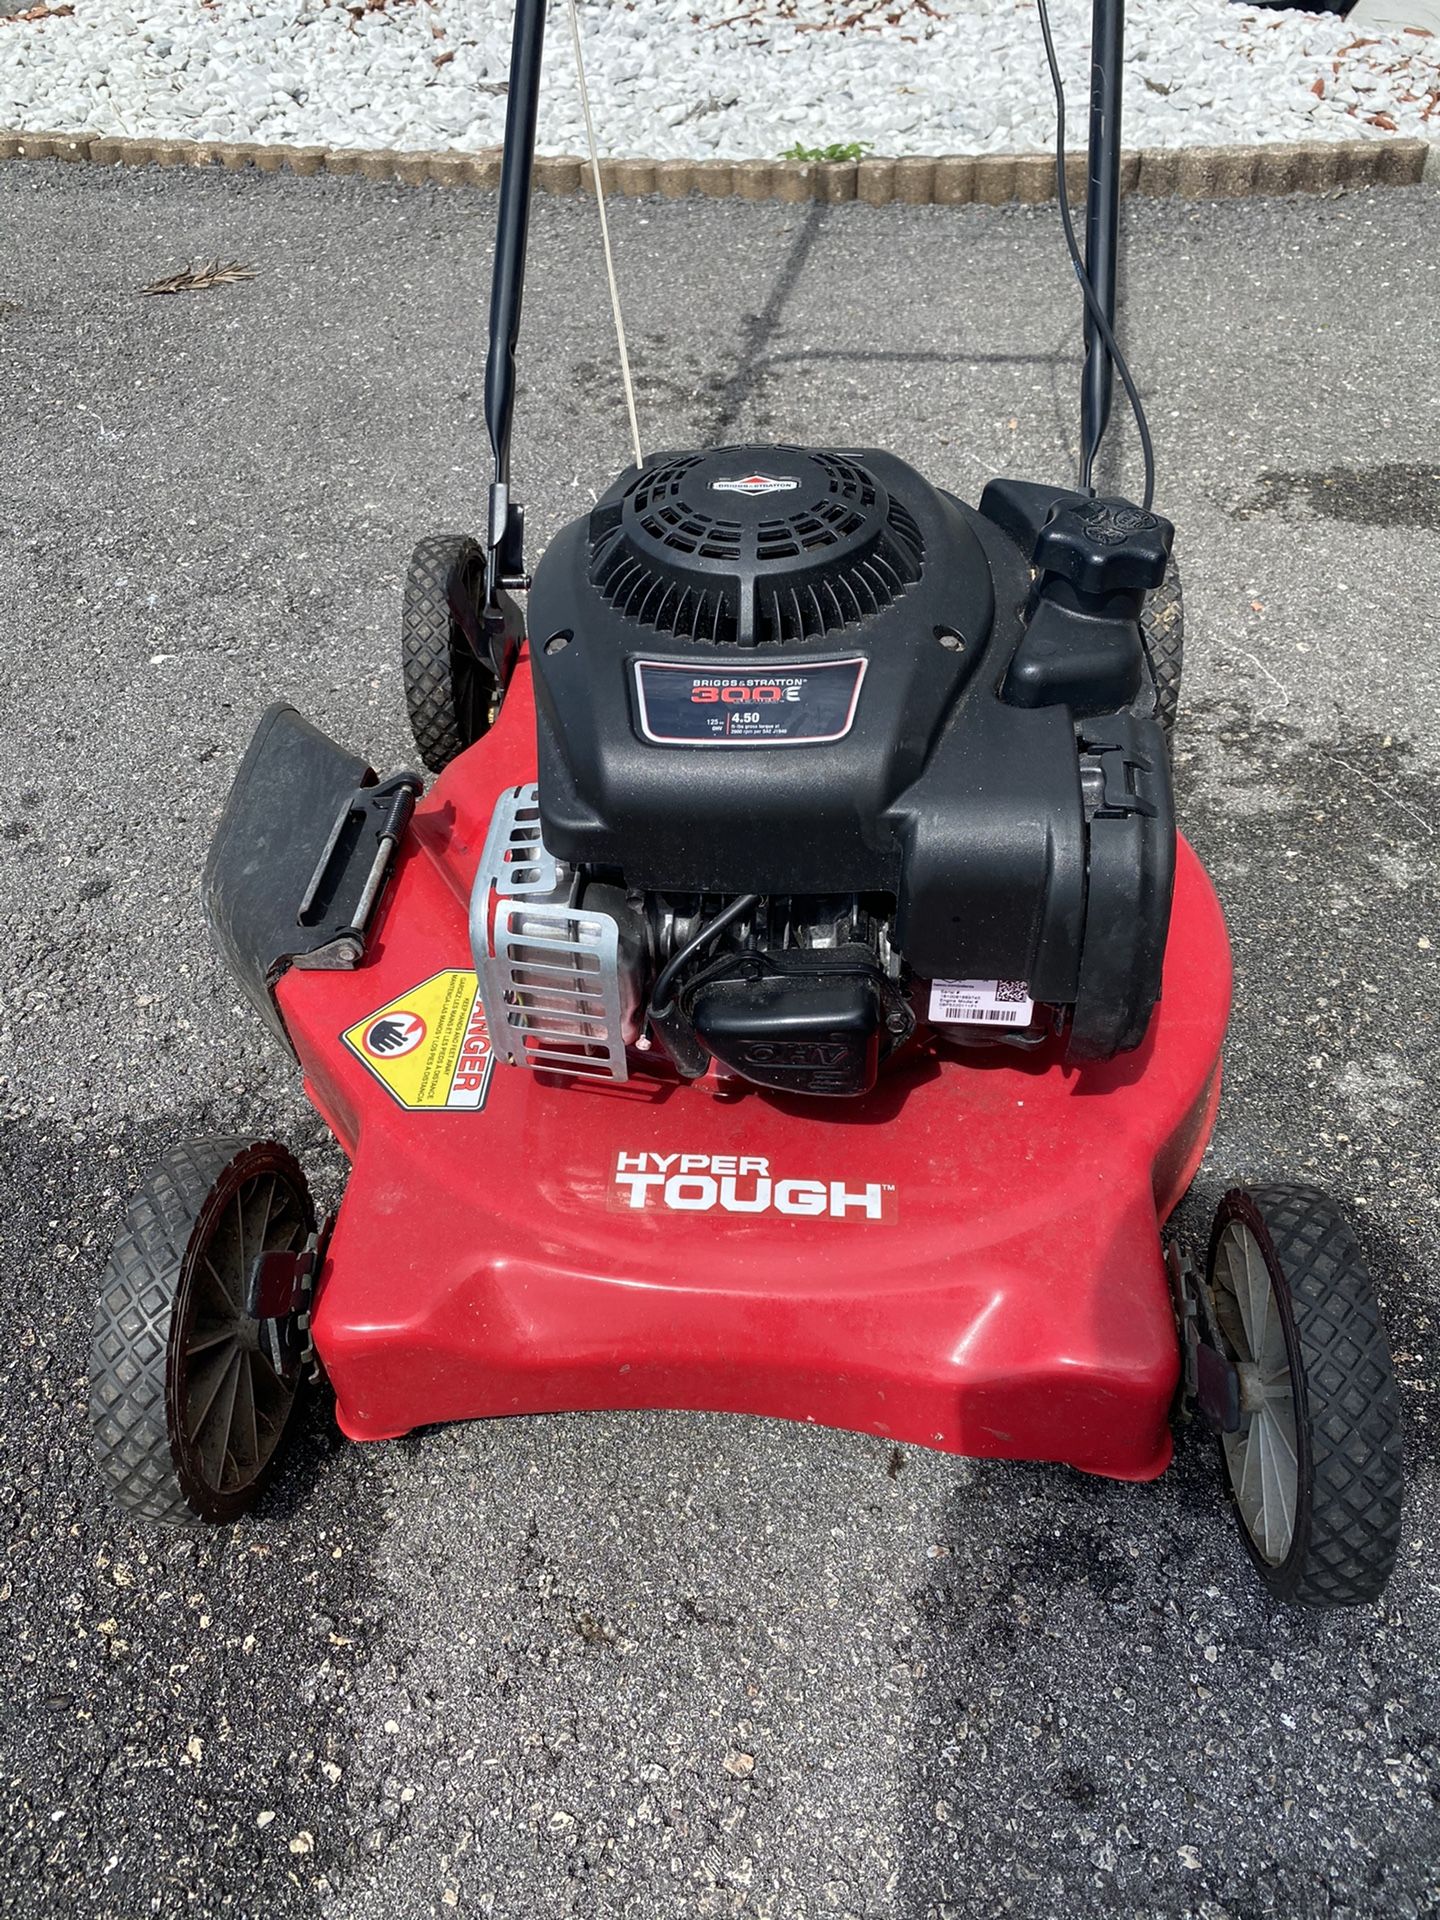 Hyper Tough 20” Side Discharge Push Mower with Briggs and Stratton Engine